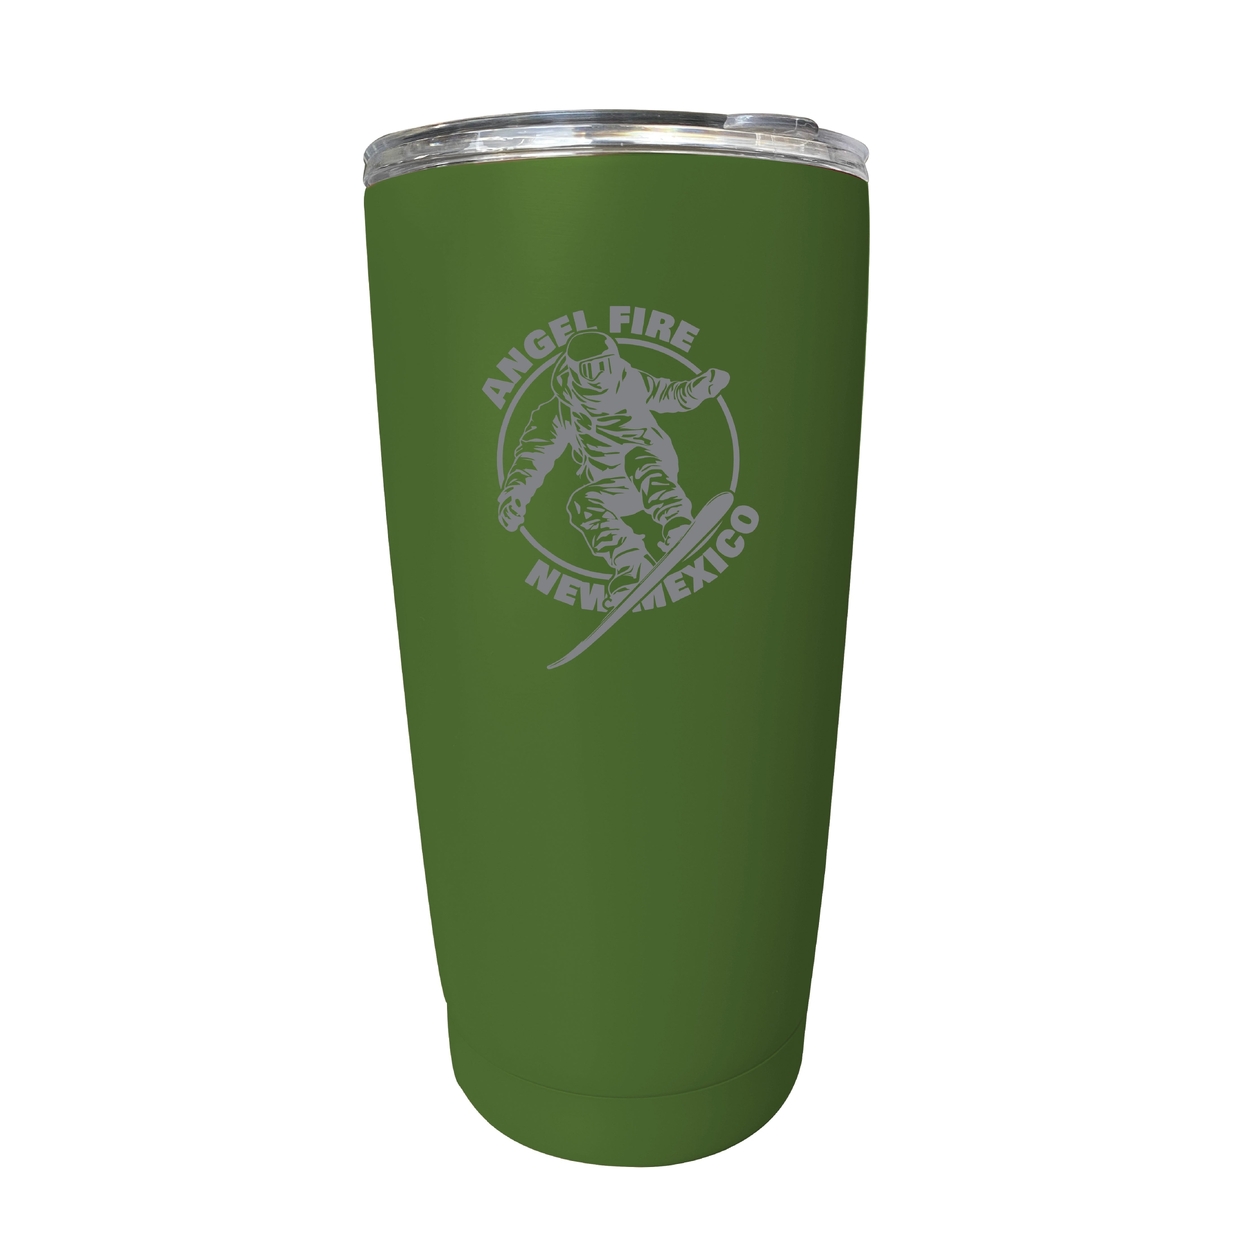 Angel Fire New Mexico Souvenir 16 Oz Engraved Stainless Steel Insulated Tumbler - Green,,4-Pack